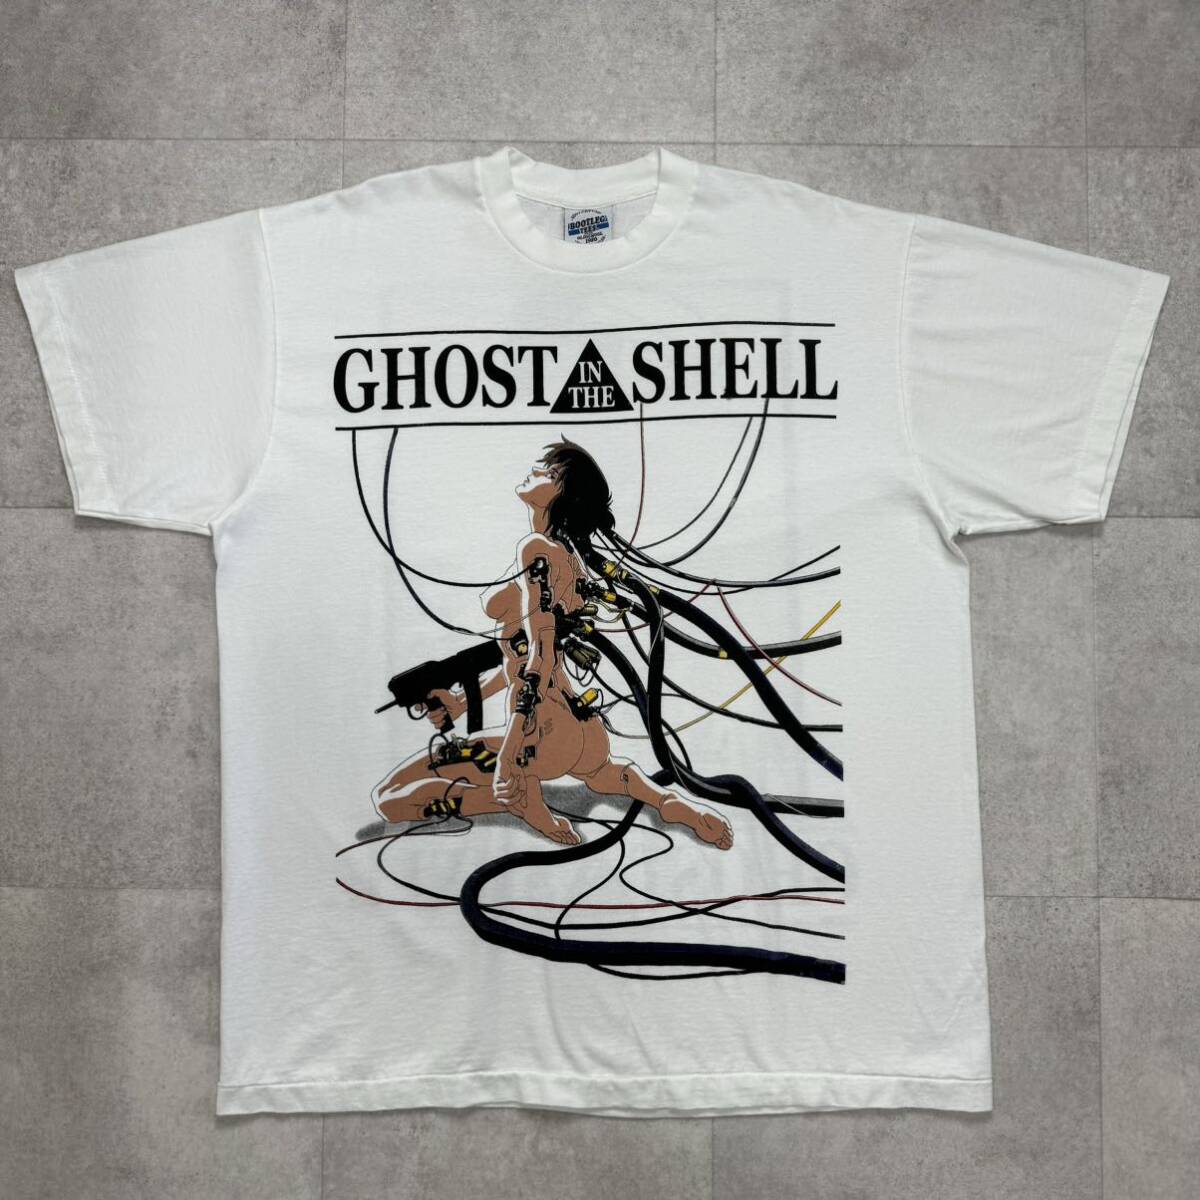 GHOST IN THE SHELL 攻殻機動隊 Tシャツ teeの画像1